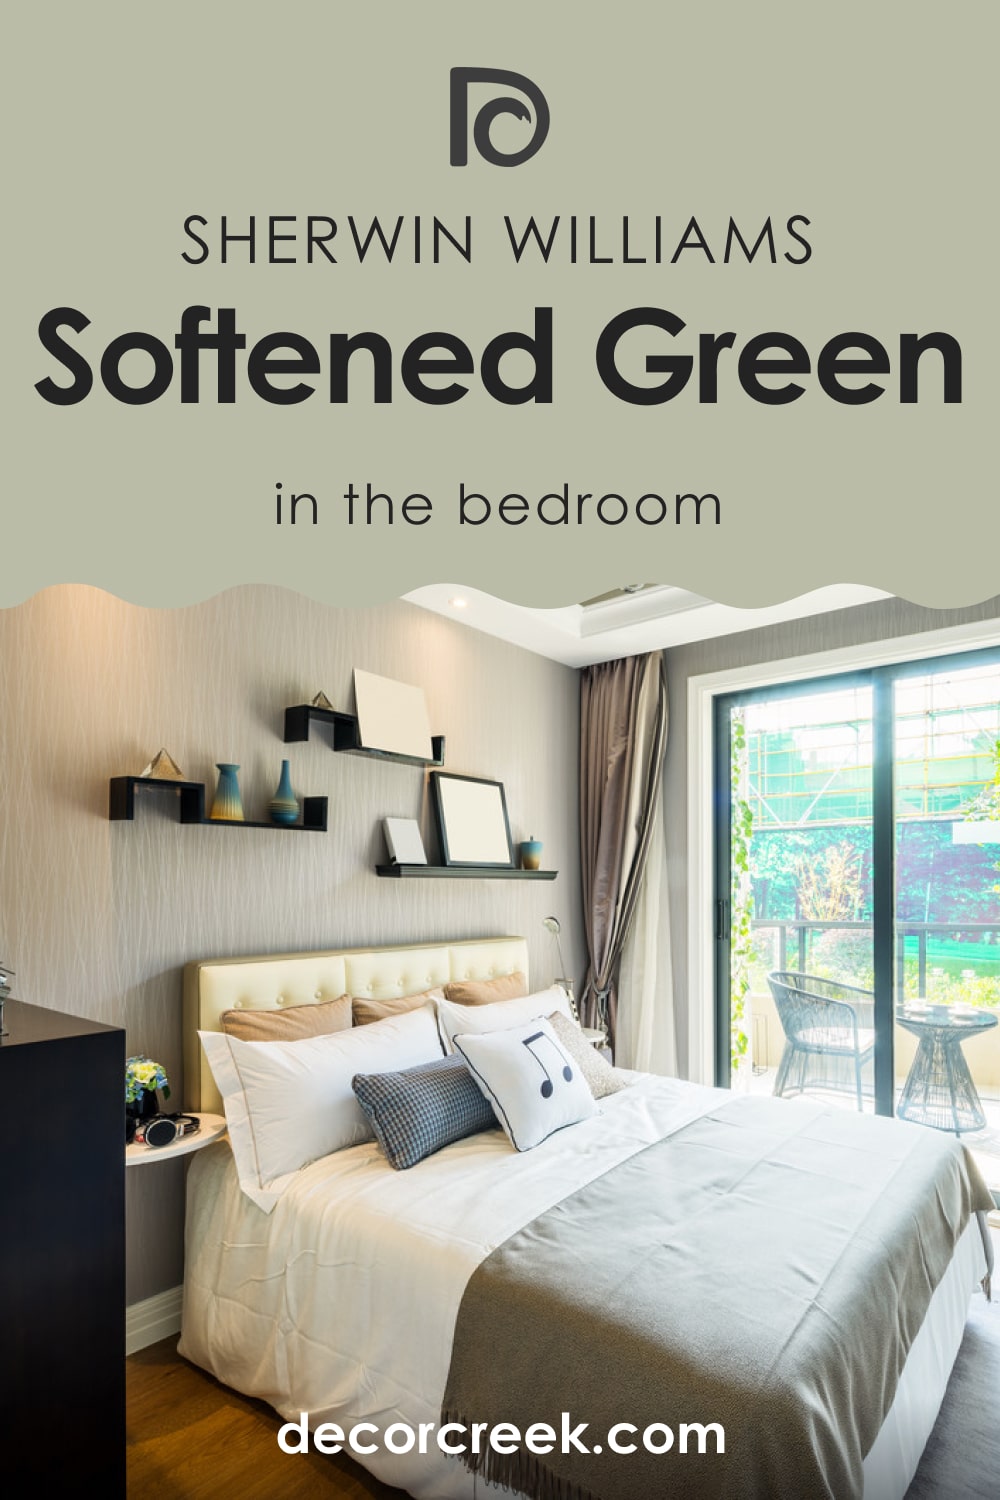 Softened Green SW-6177 in a Bedroom